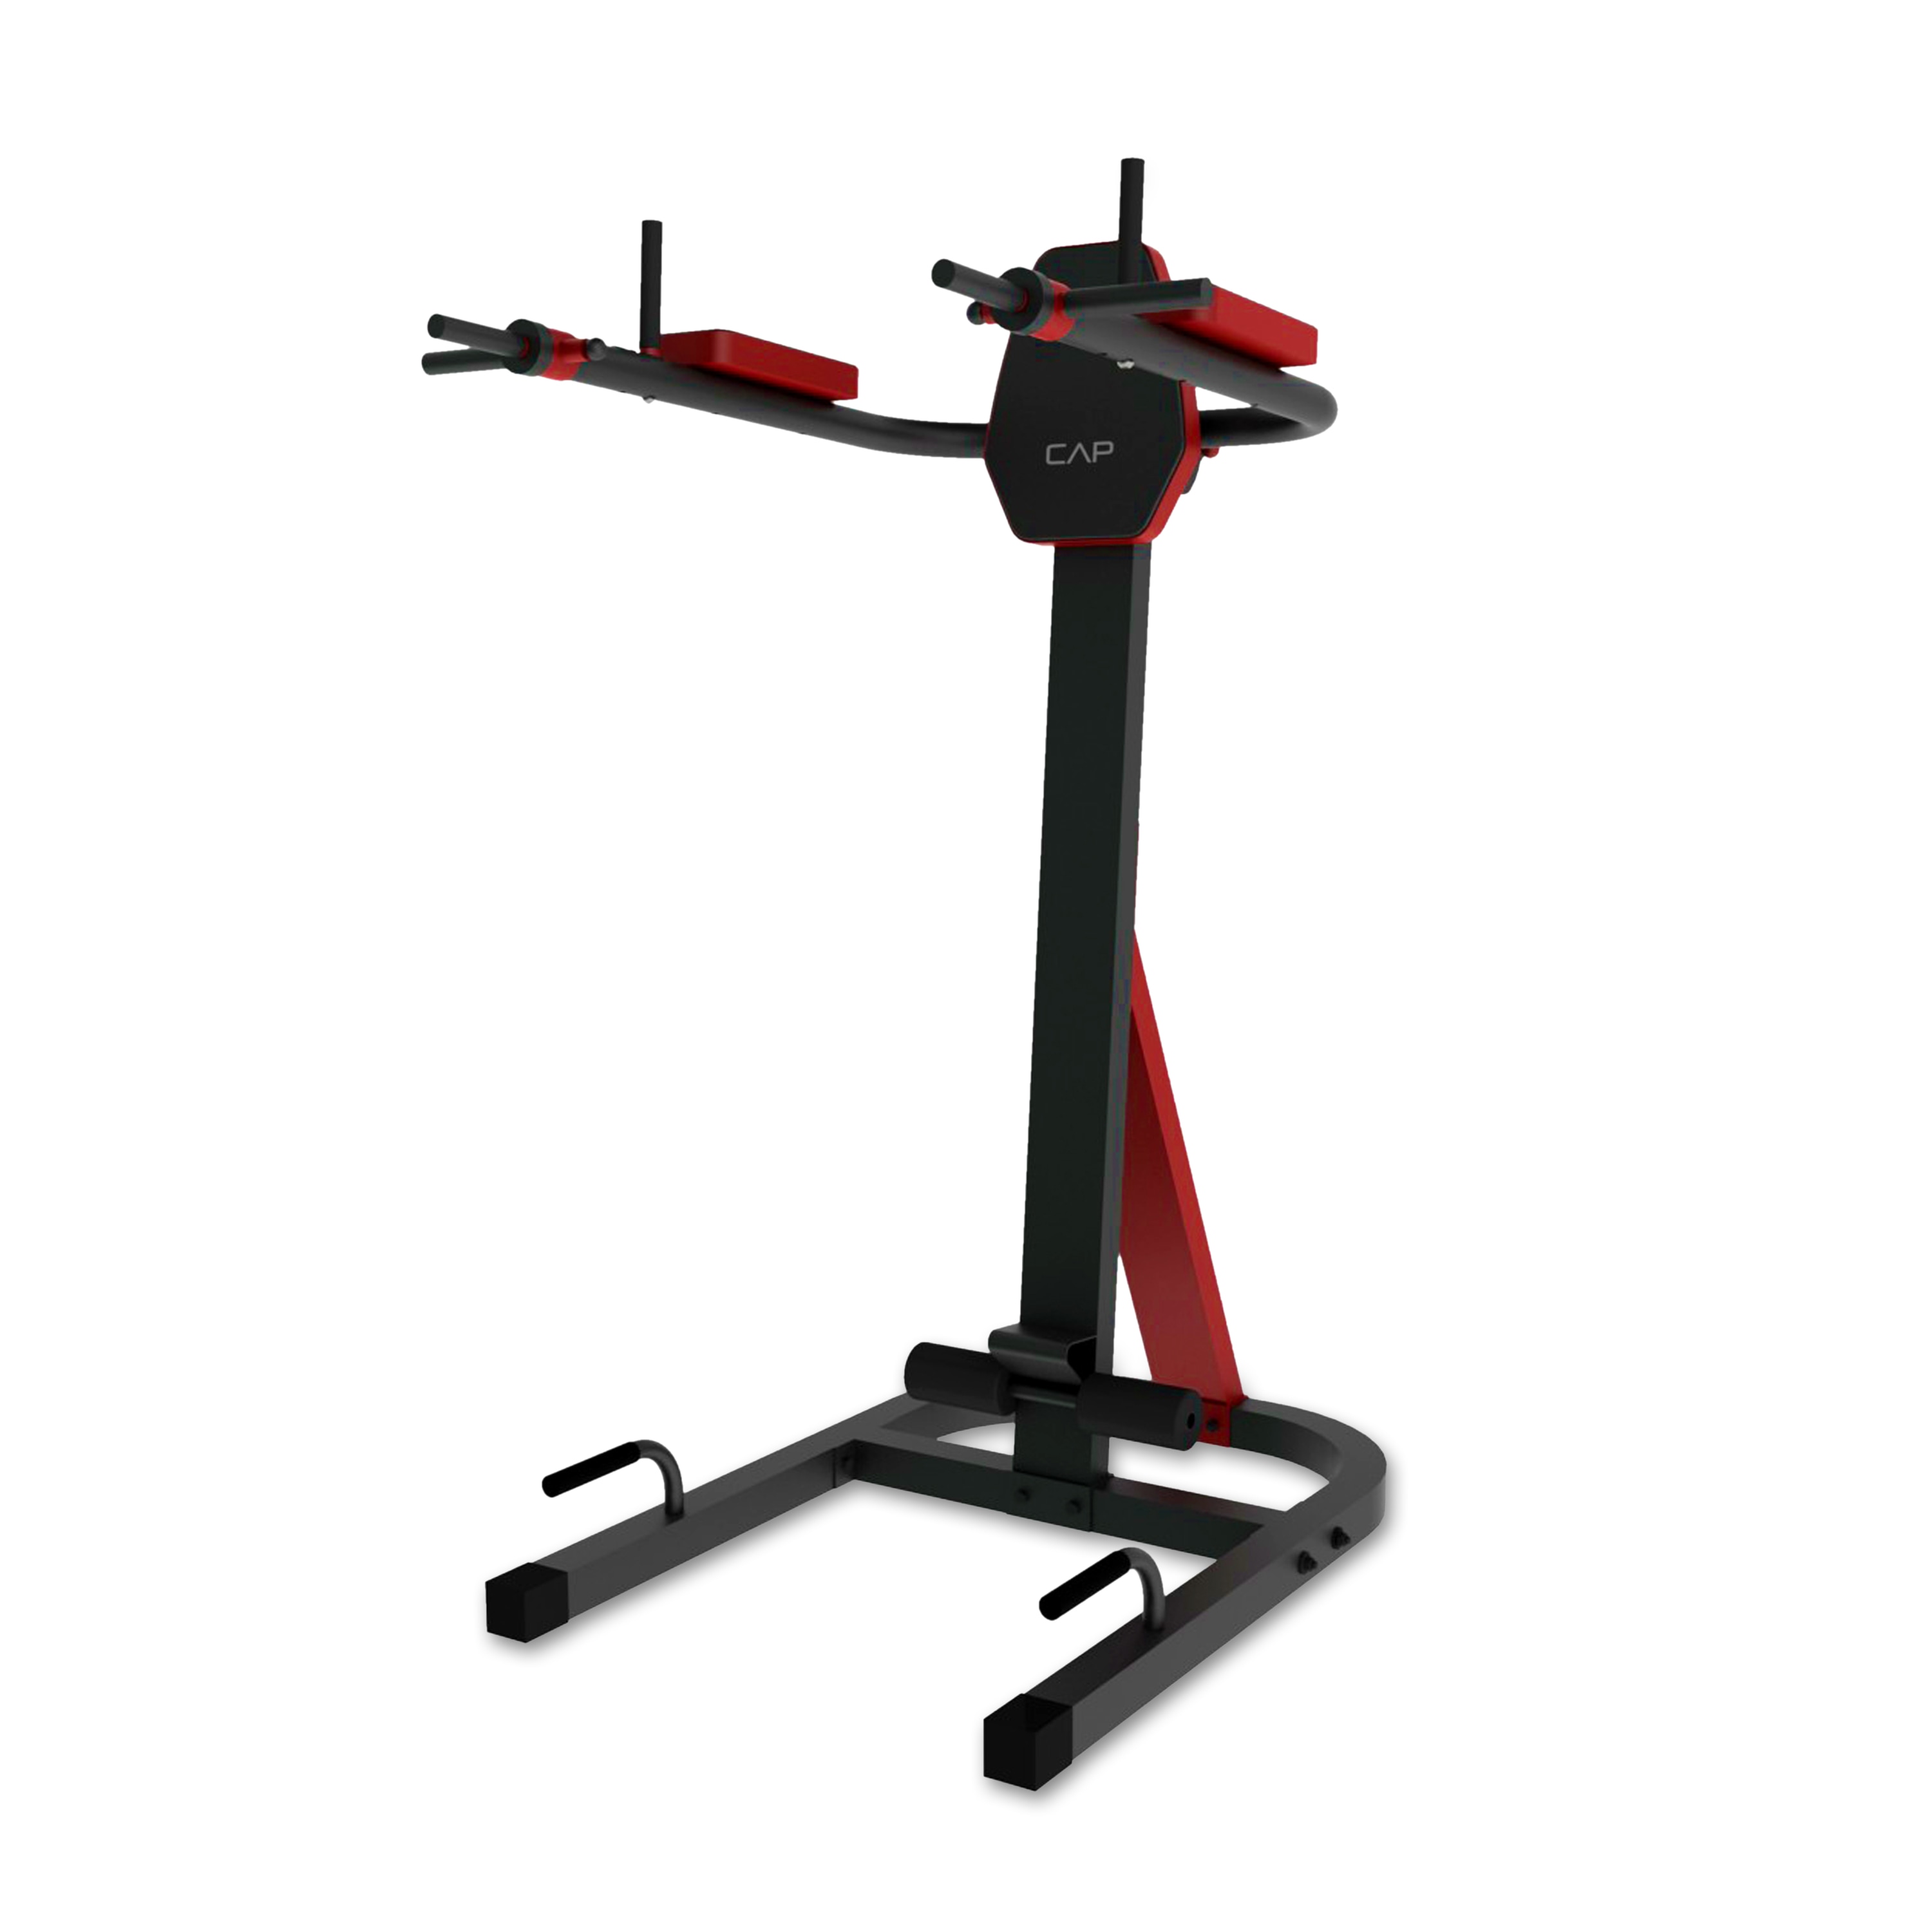 Cap Strength Convertible Vkr Power Tower (Black/redNarrow and wide grip pull up barVertical knee raise stationDip station and push up handlesArm rests can be raised and locked in place to use as a pull up stationOversized tubing and thick two tone padding